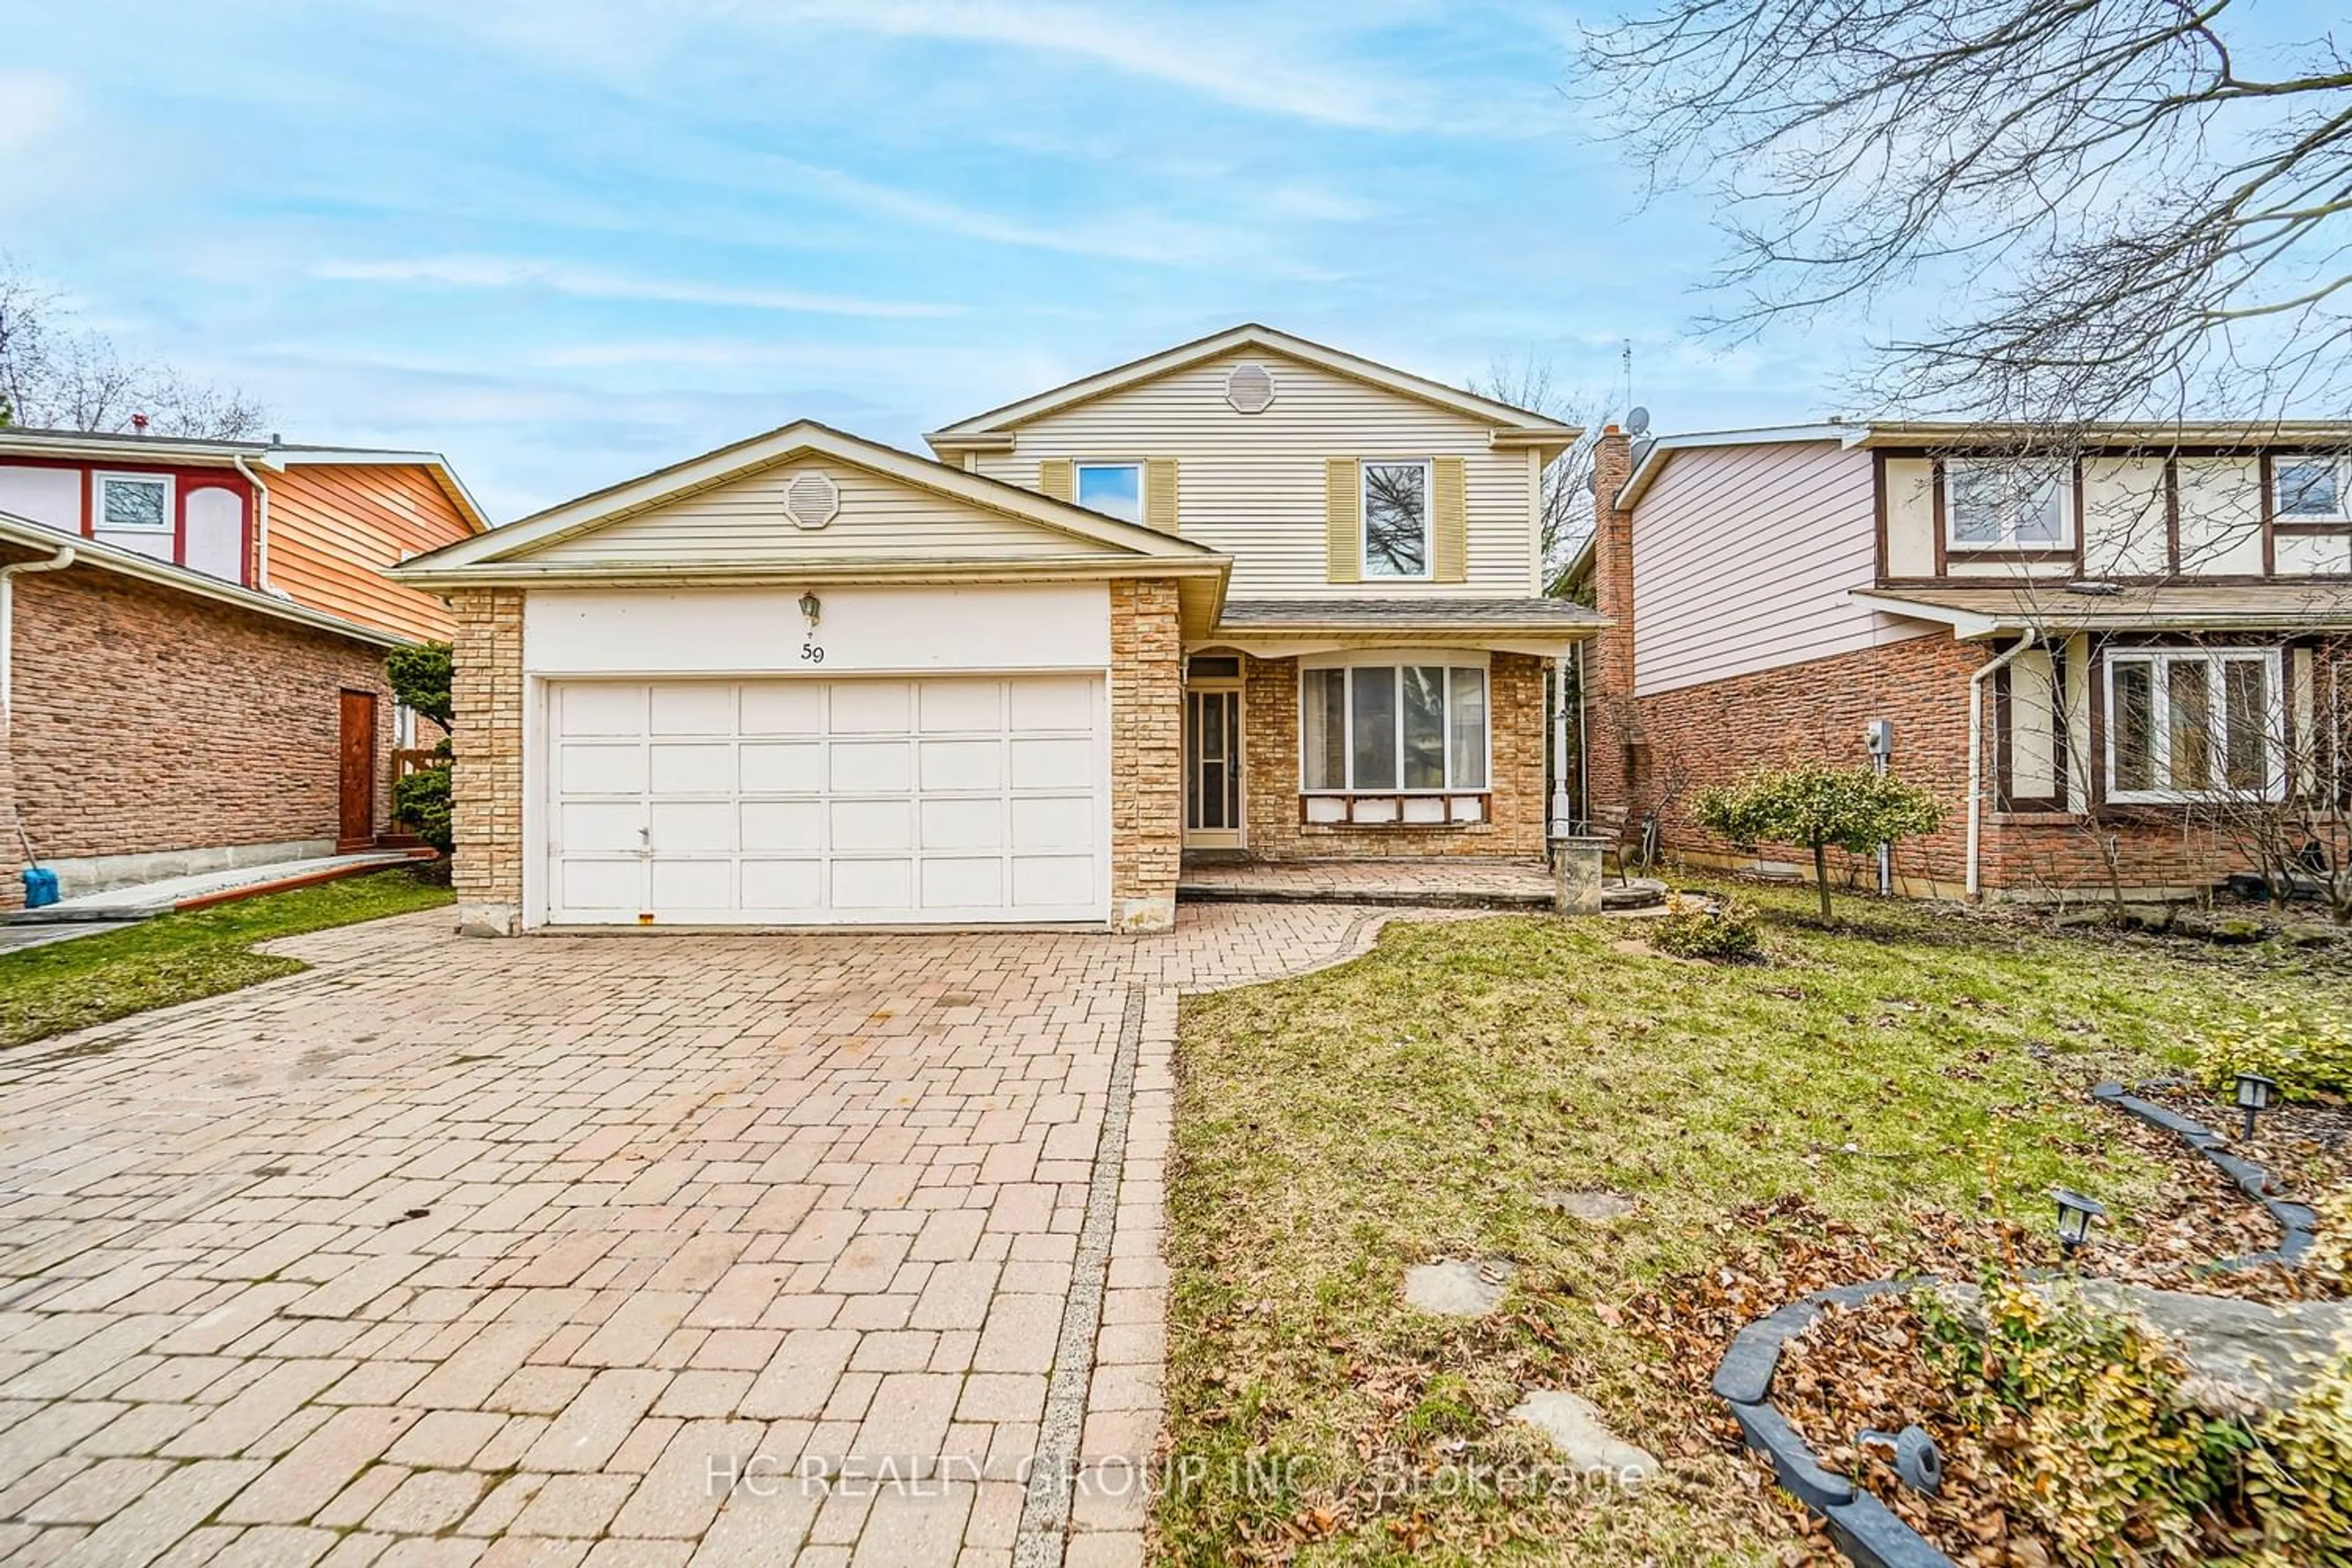 Home with brick exterior material for 59 Braeburn Dr, Markham Ontario L3T 4W7